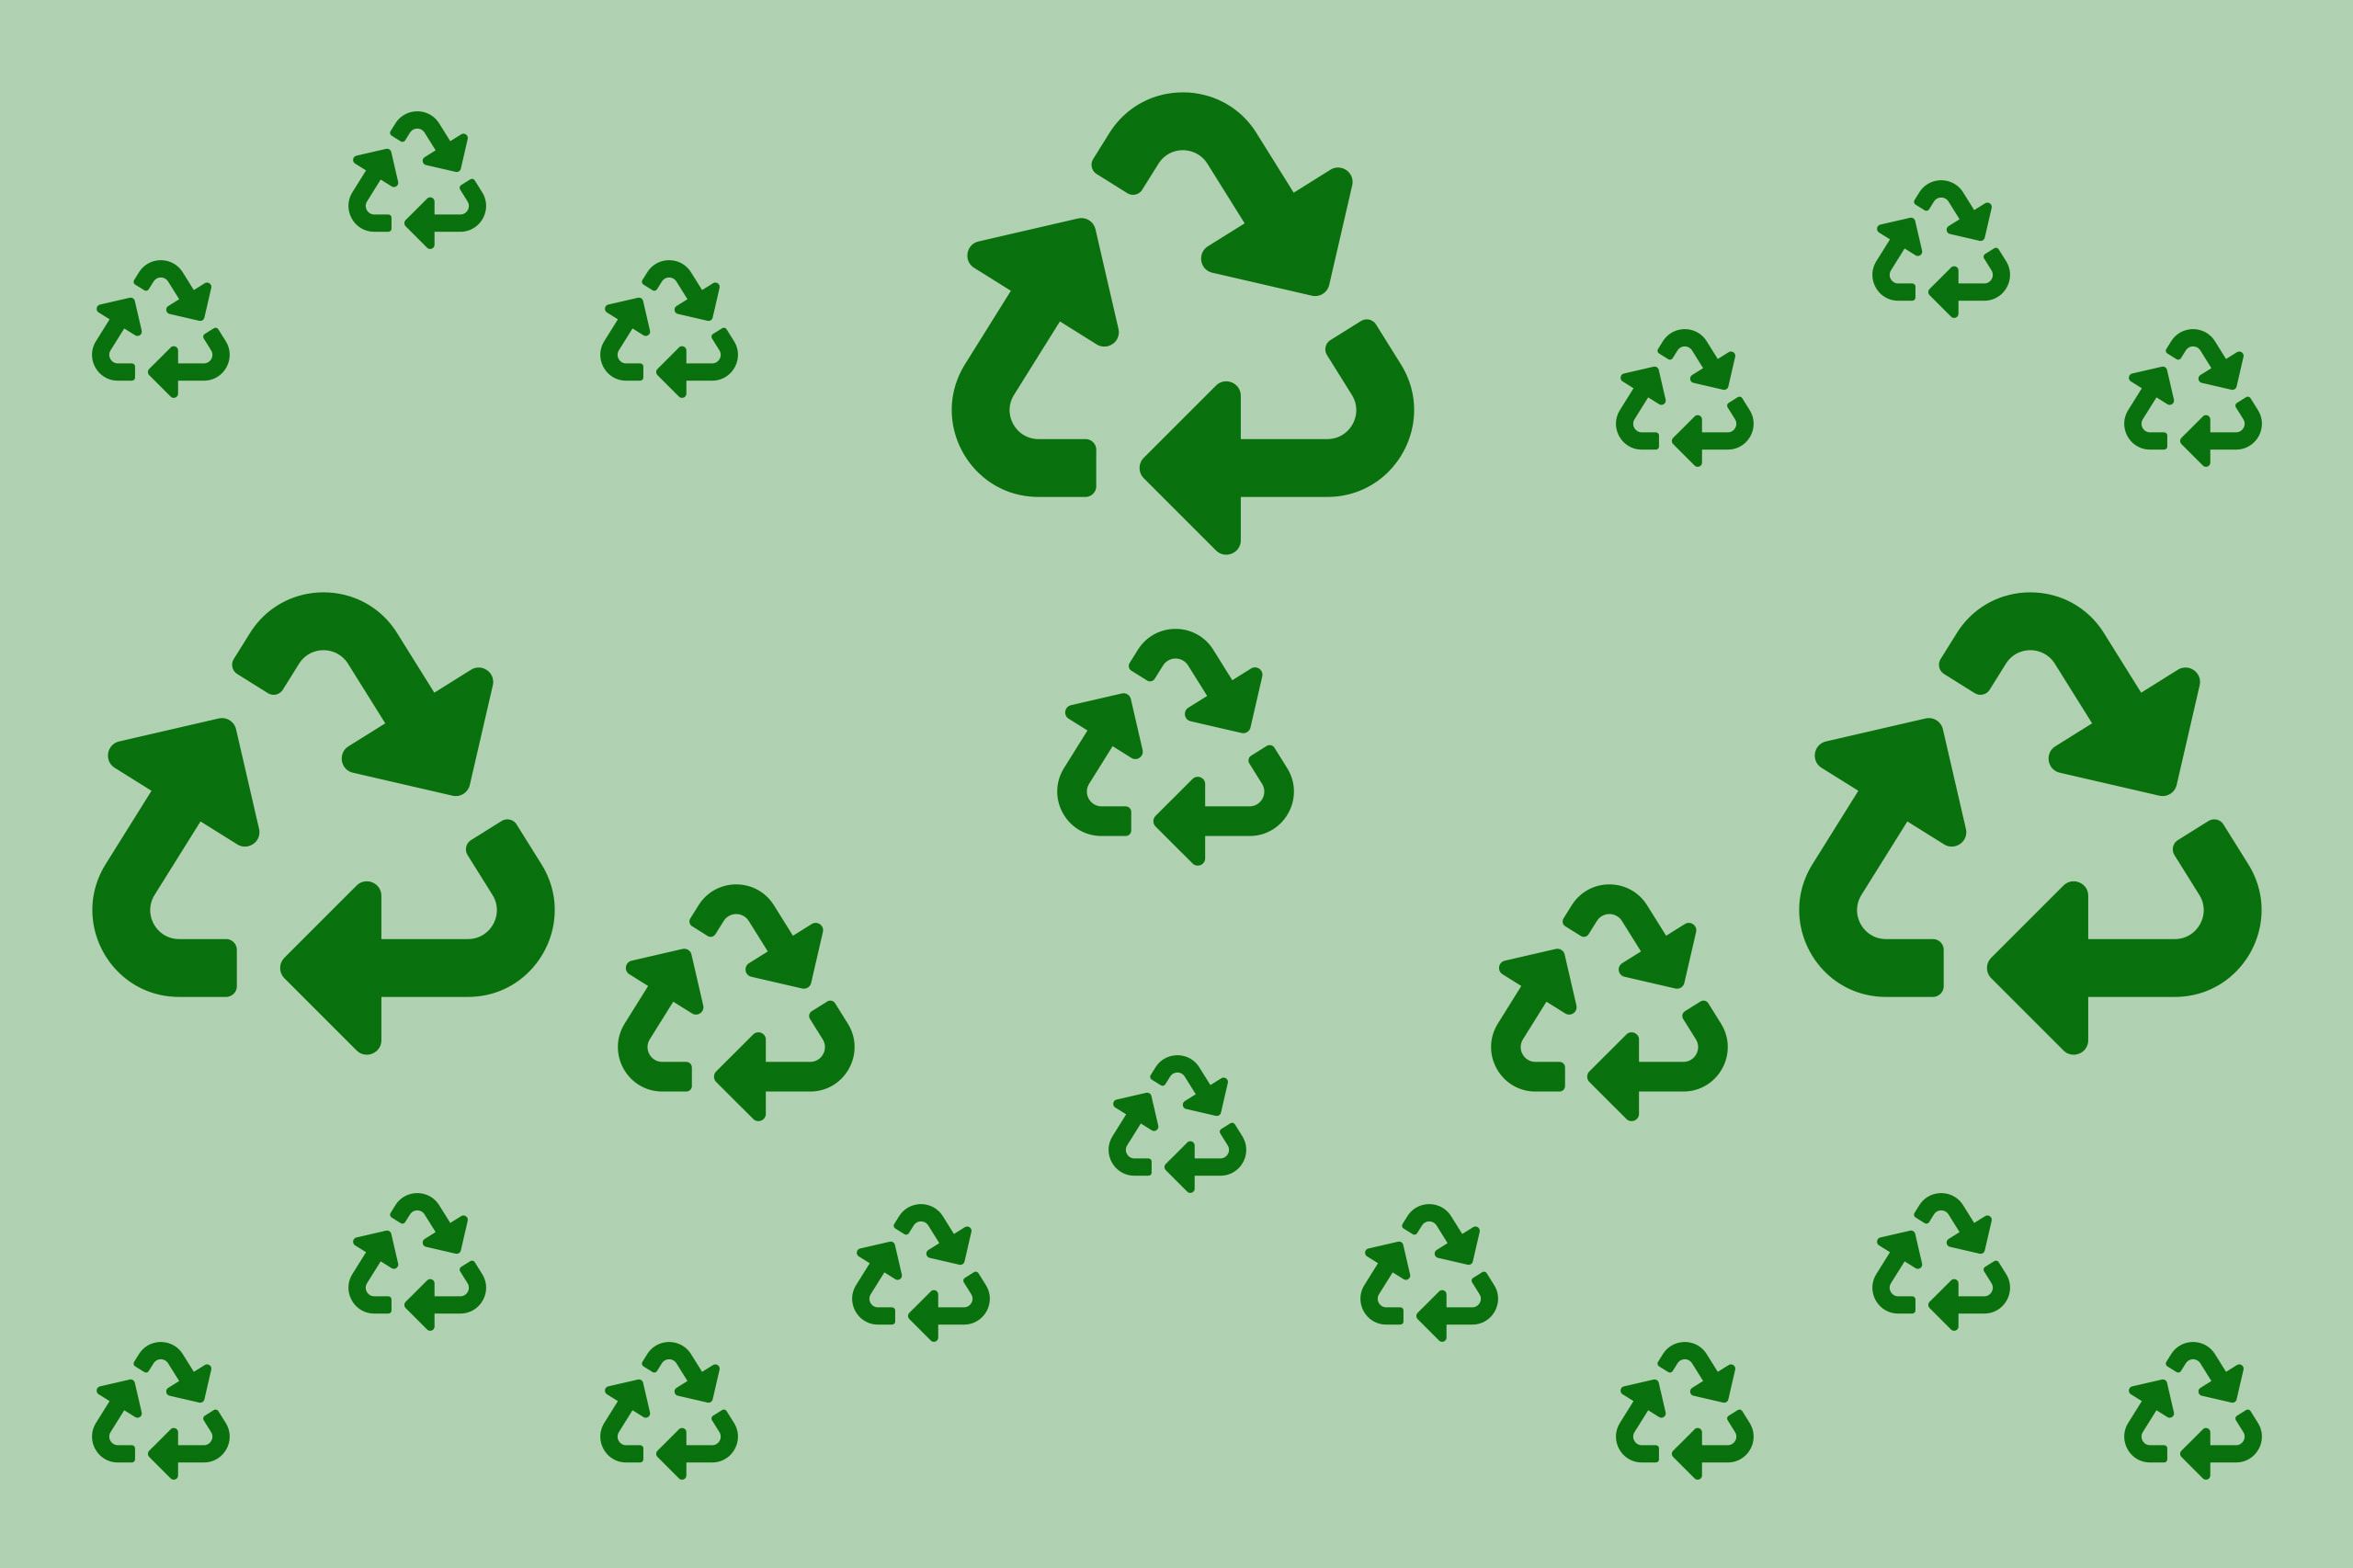 Recycle Banner